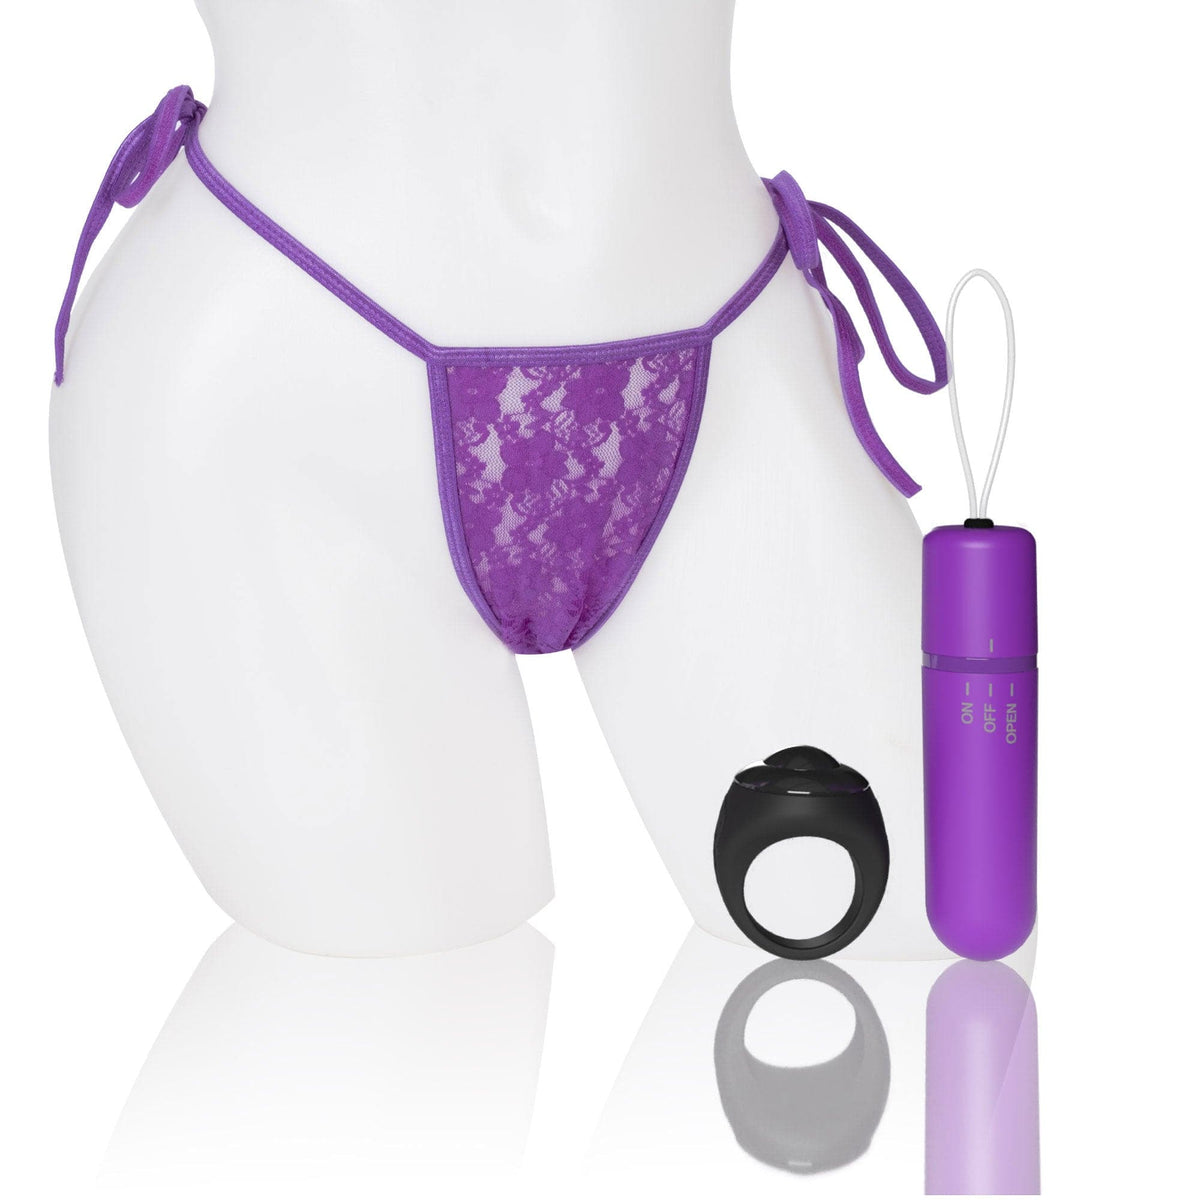 screaming o 4t vibrating panty set with remote control ring grape